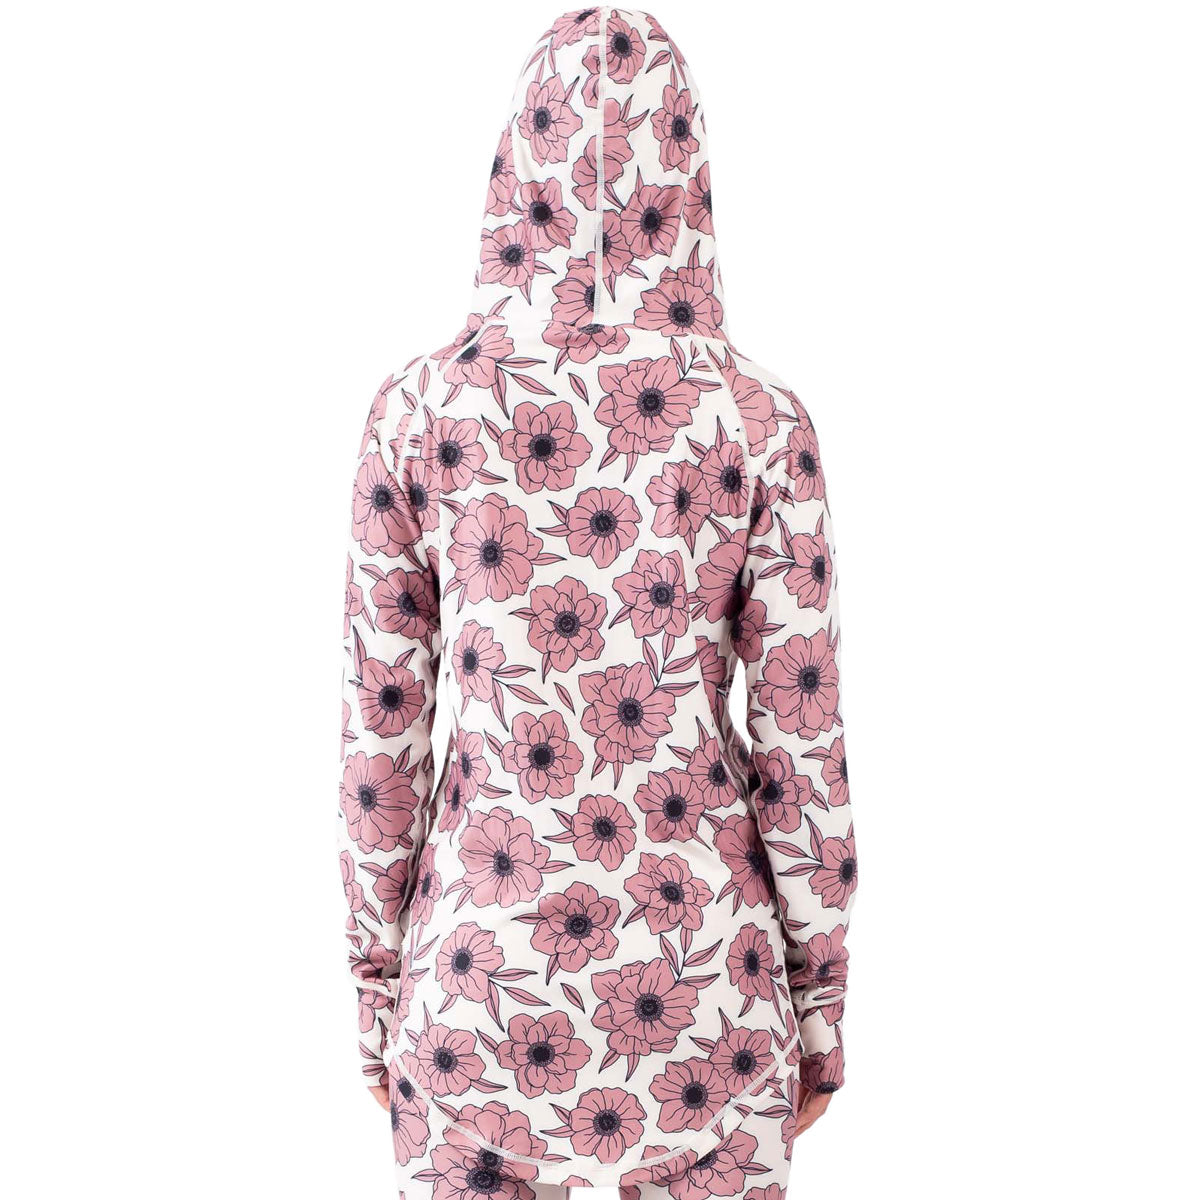 Eivy Icecold Hood Top Snowboard Base Layer - Wall Flowers image 2